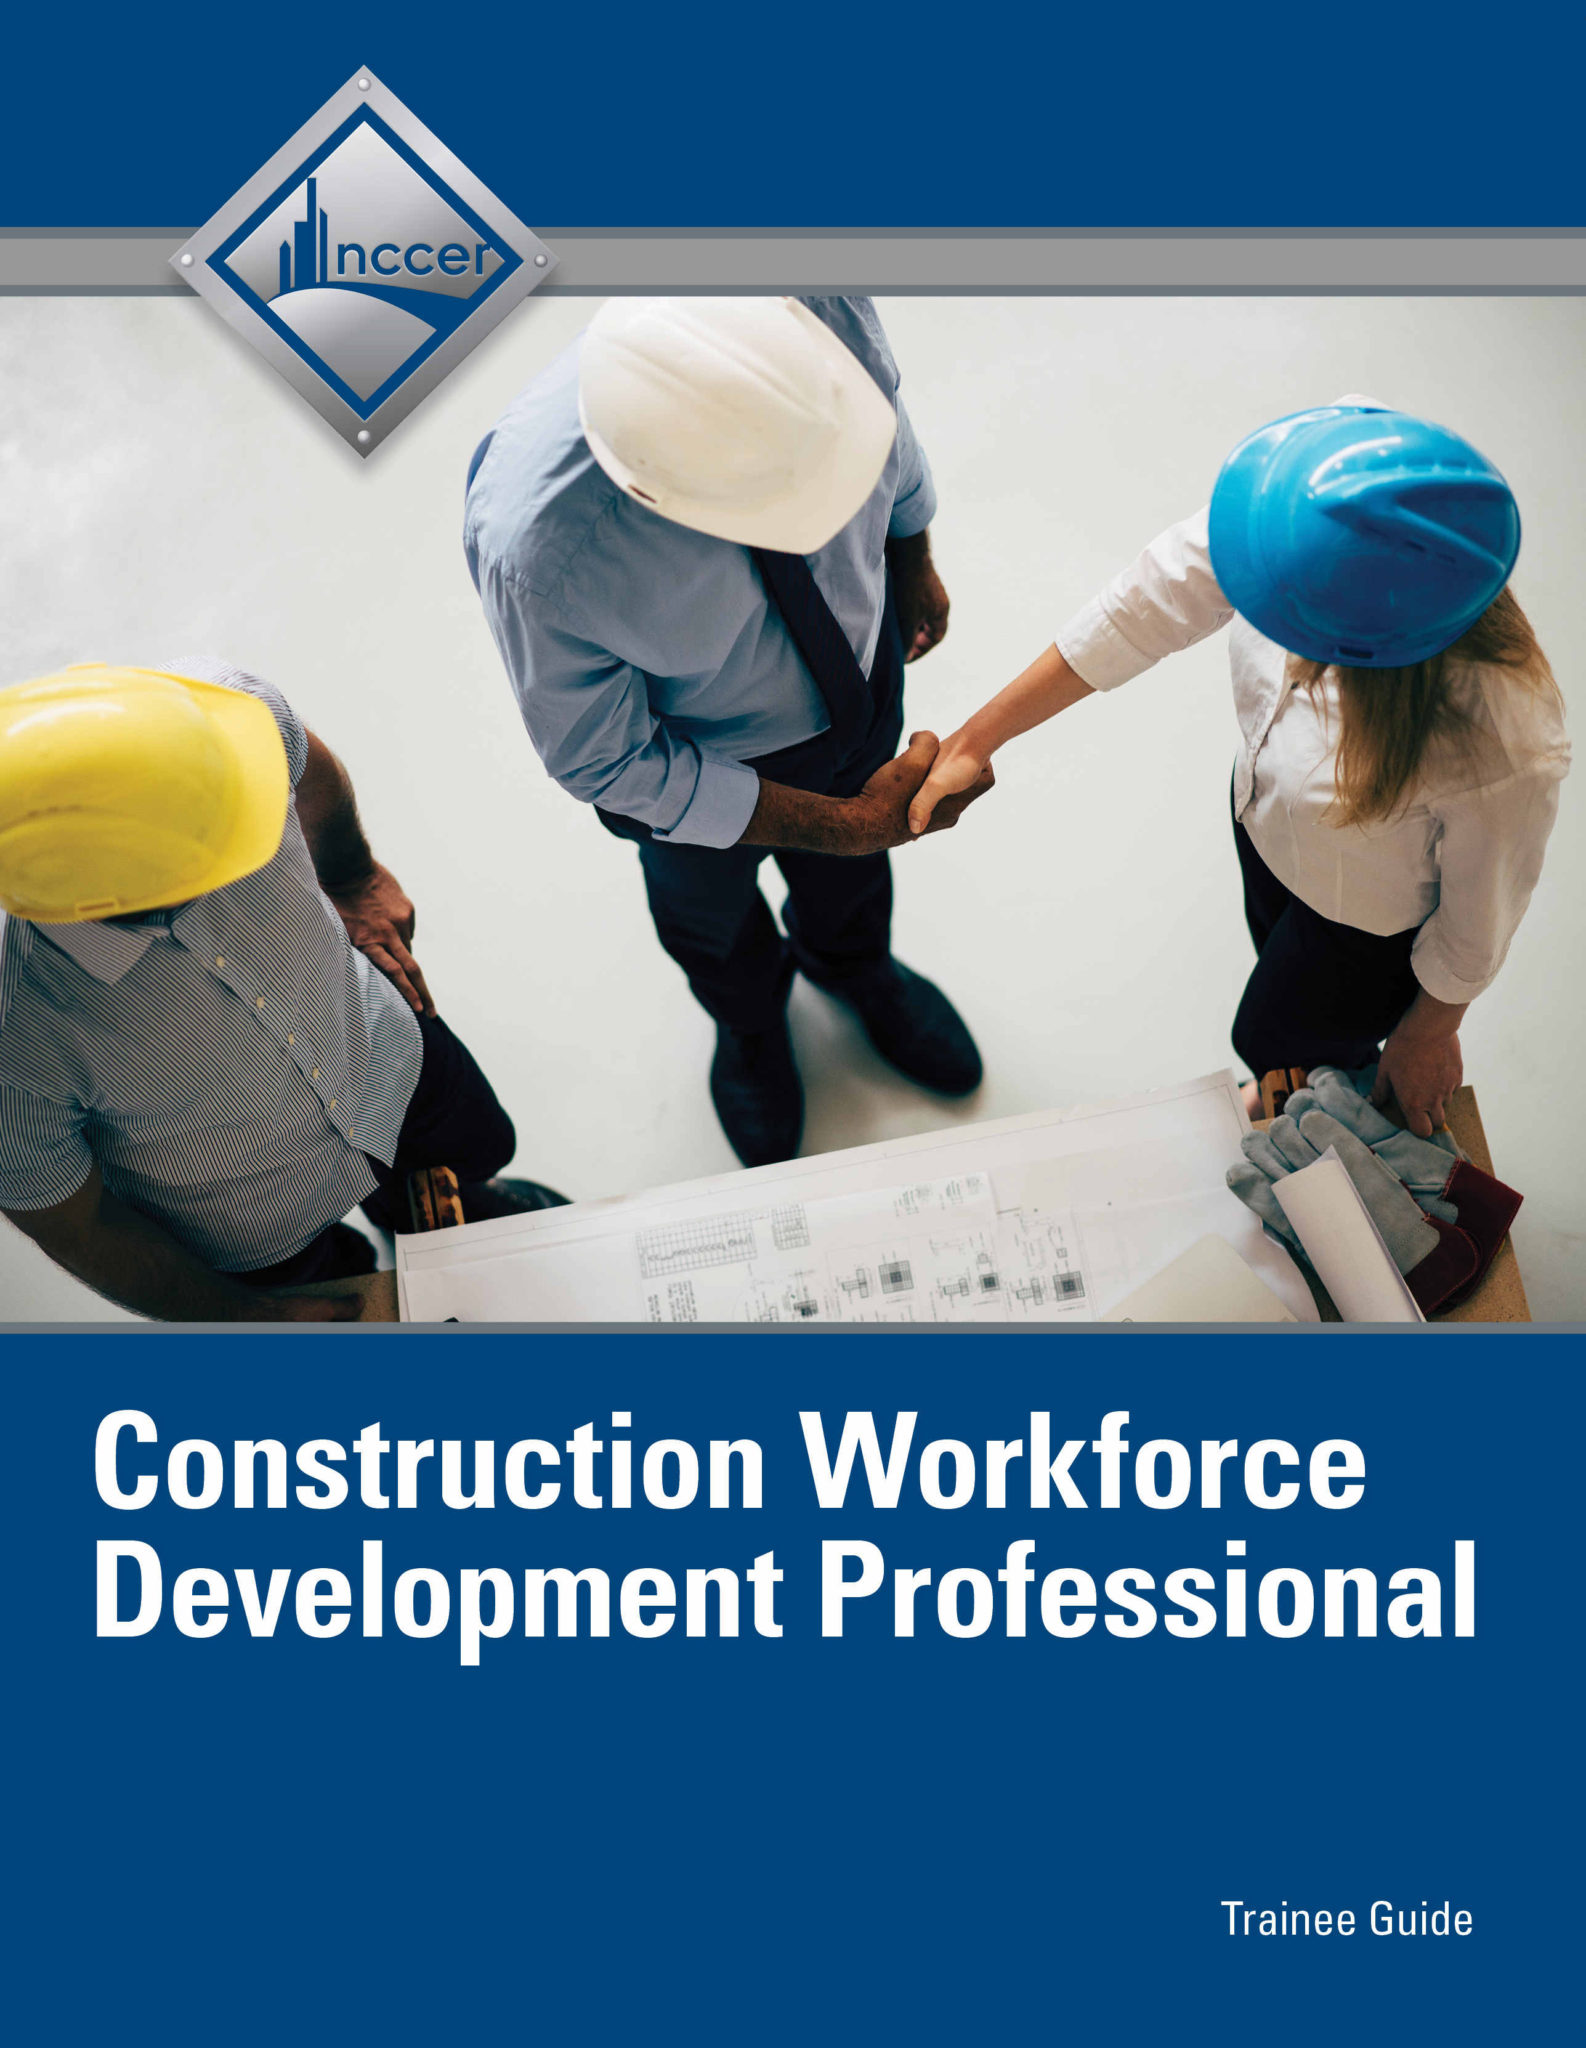 new-training-curricula-available-for-construction-industry-mentors-workforce-development